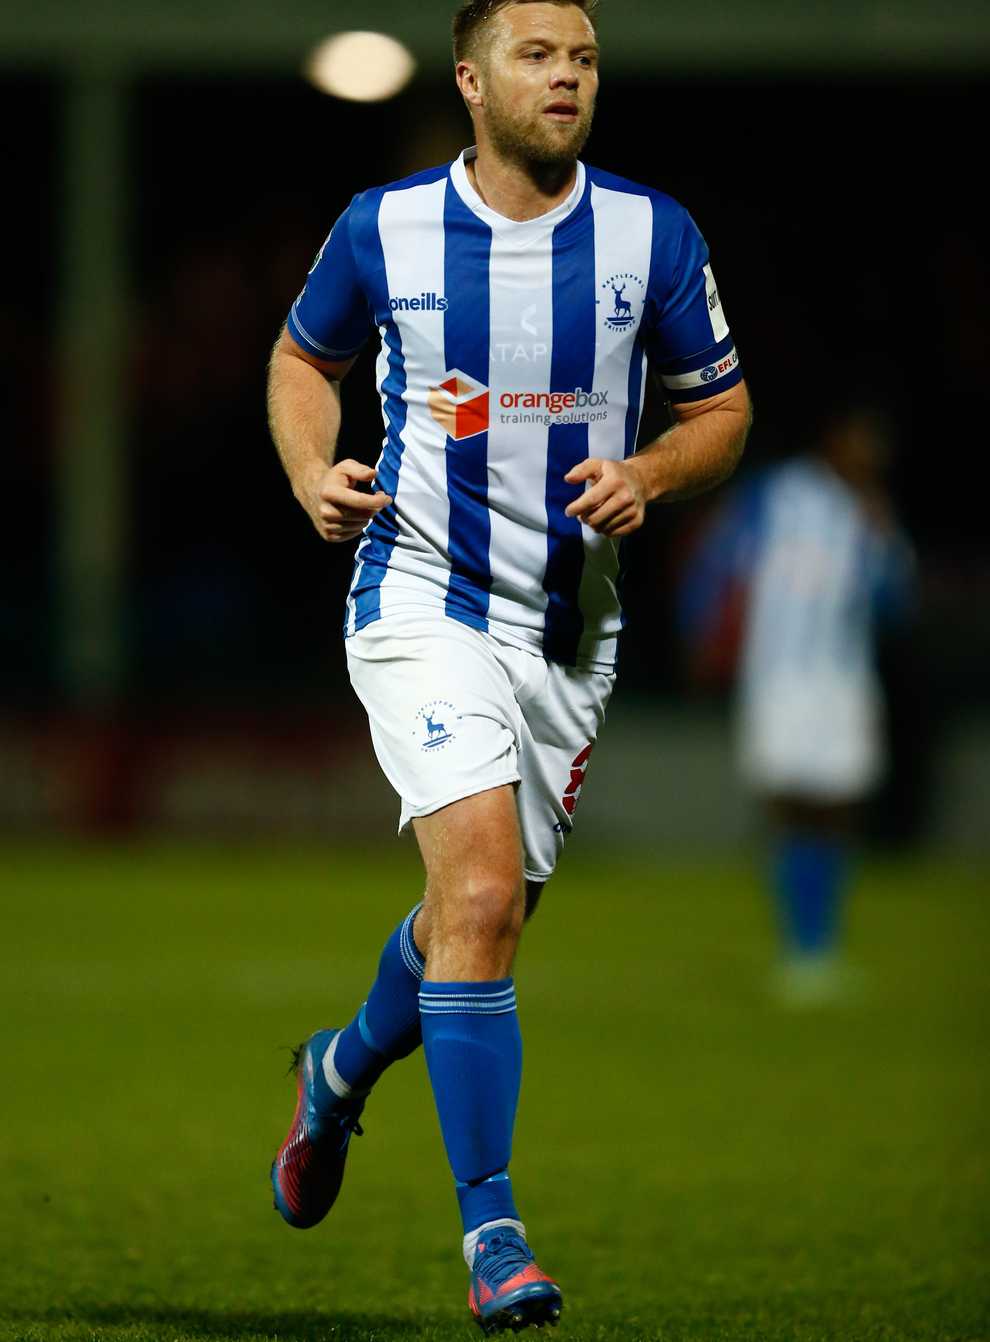 Nicky Featherstone levelled for Hartlepool against Scunthorpe (Will Matthews/PA)